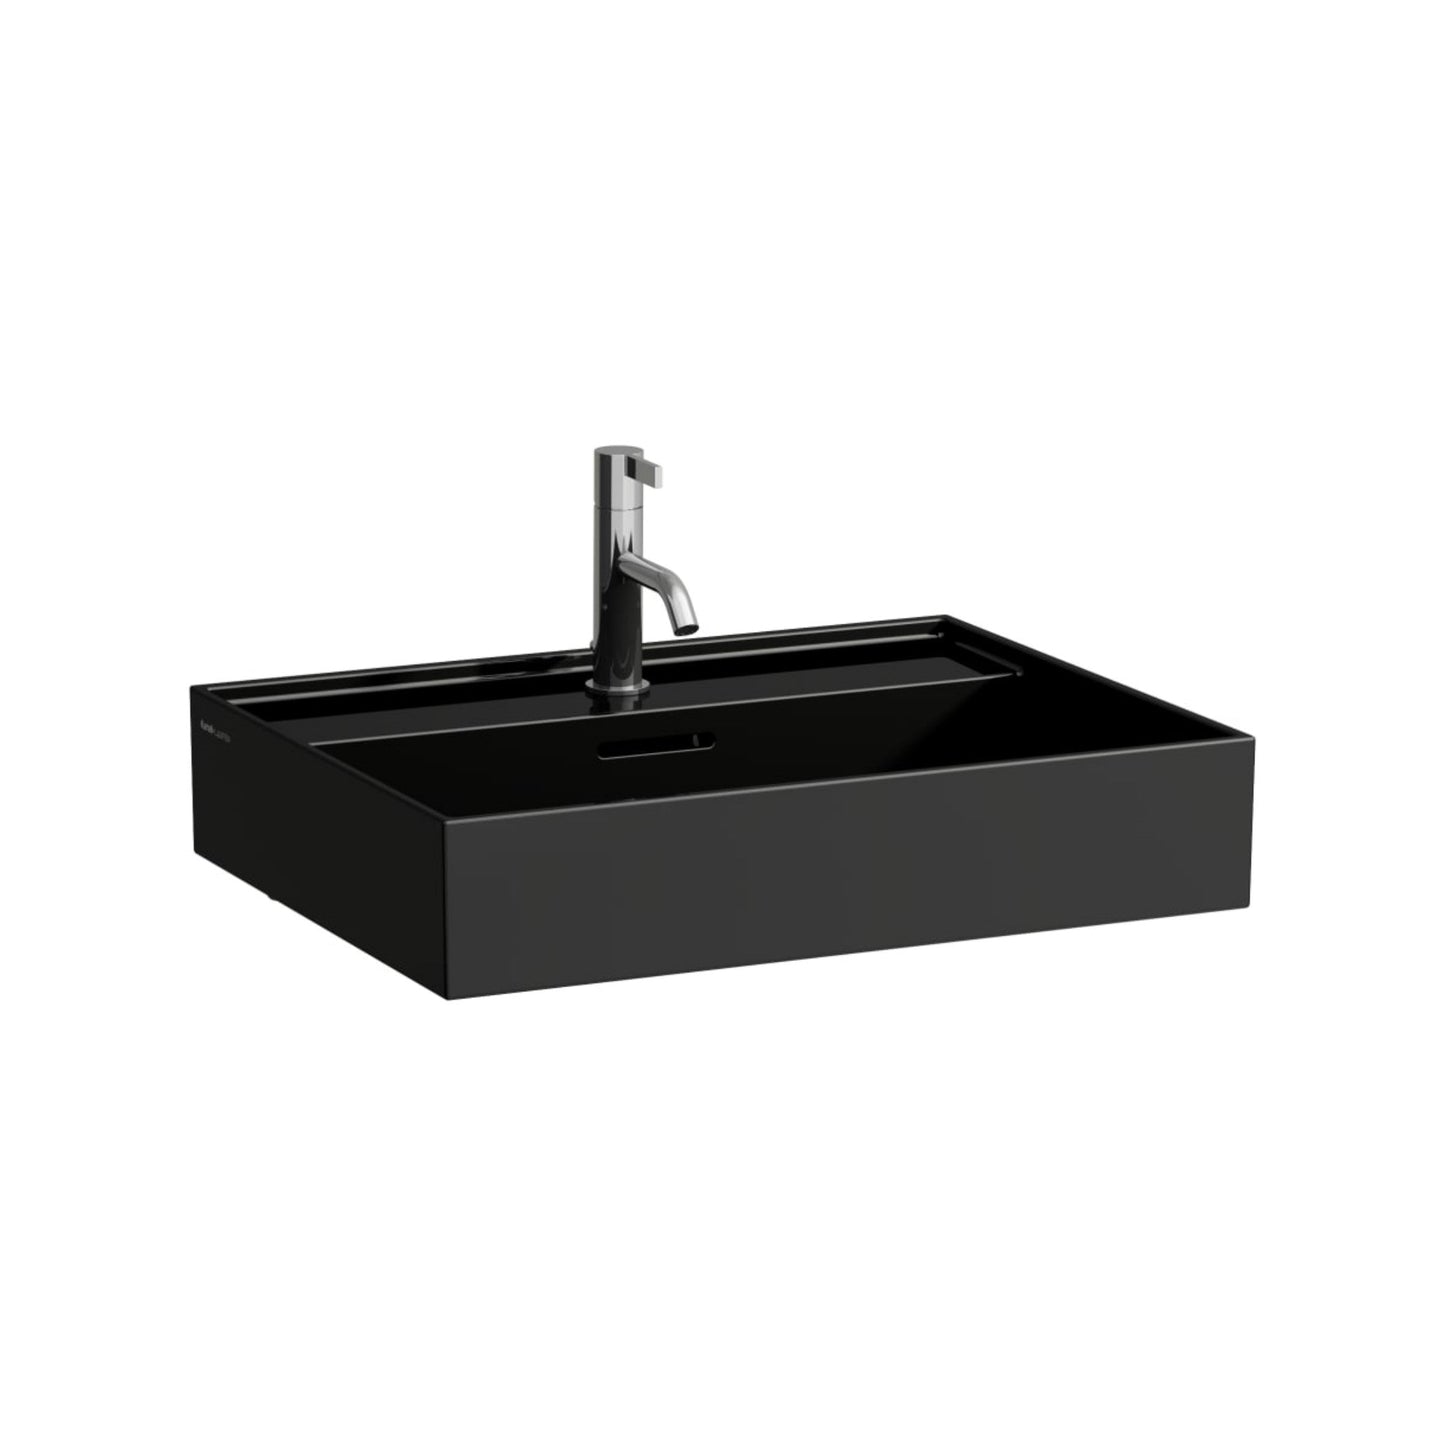 Laufen Kartell 24" x 18" Glossy Black Countertop Bathroom Sink With Faucet Hole